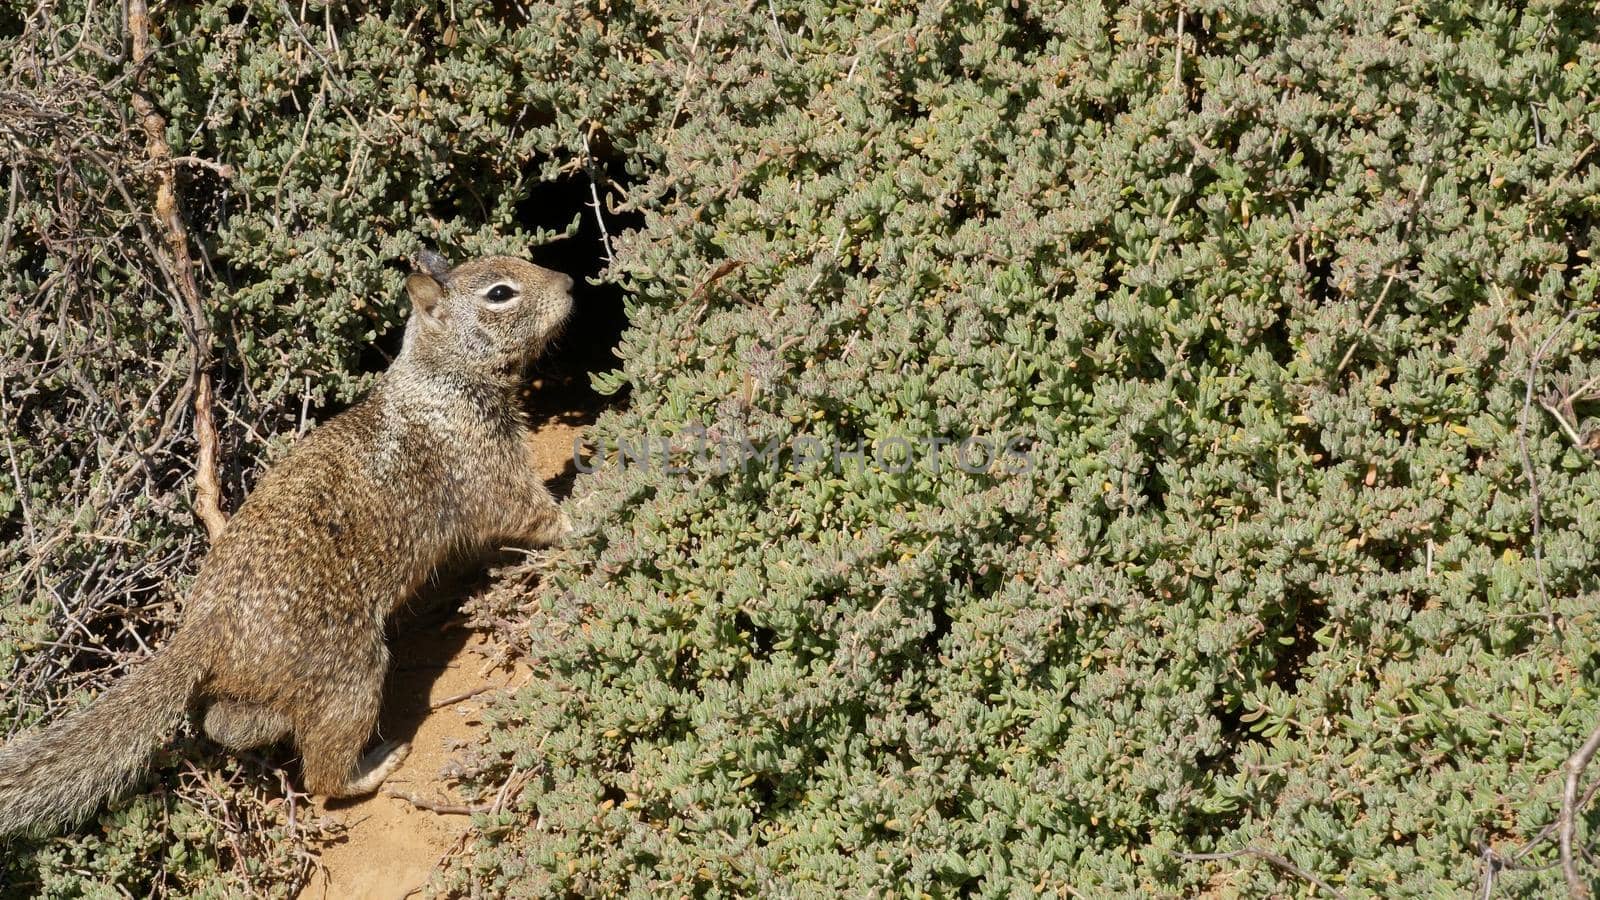 Beechey ground squirrel, common in California, Pacific coast, USA. Funny behavior of cute gray wild rodent. Small amusing animal in natural habitat. Pretty little endemic looking for food in America.